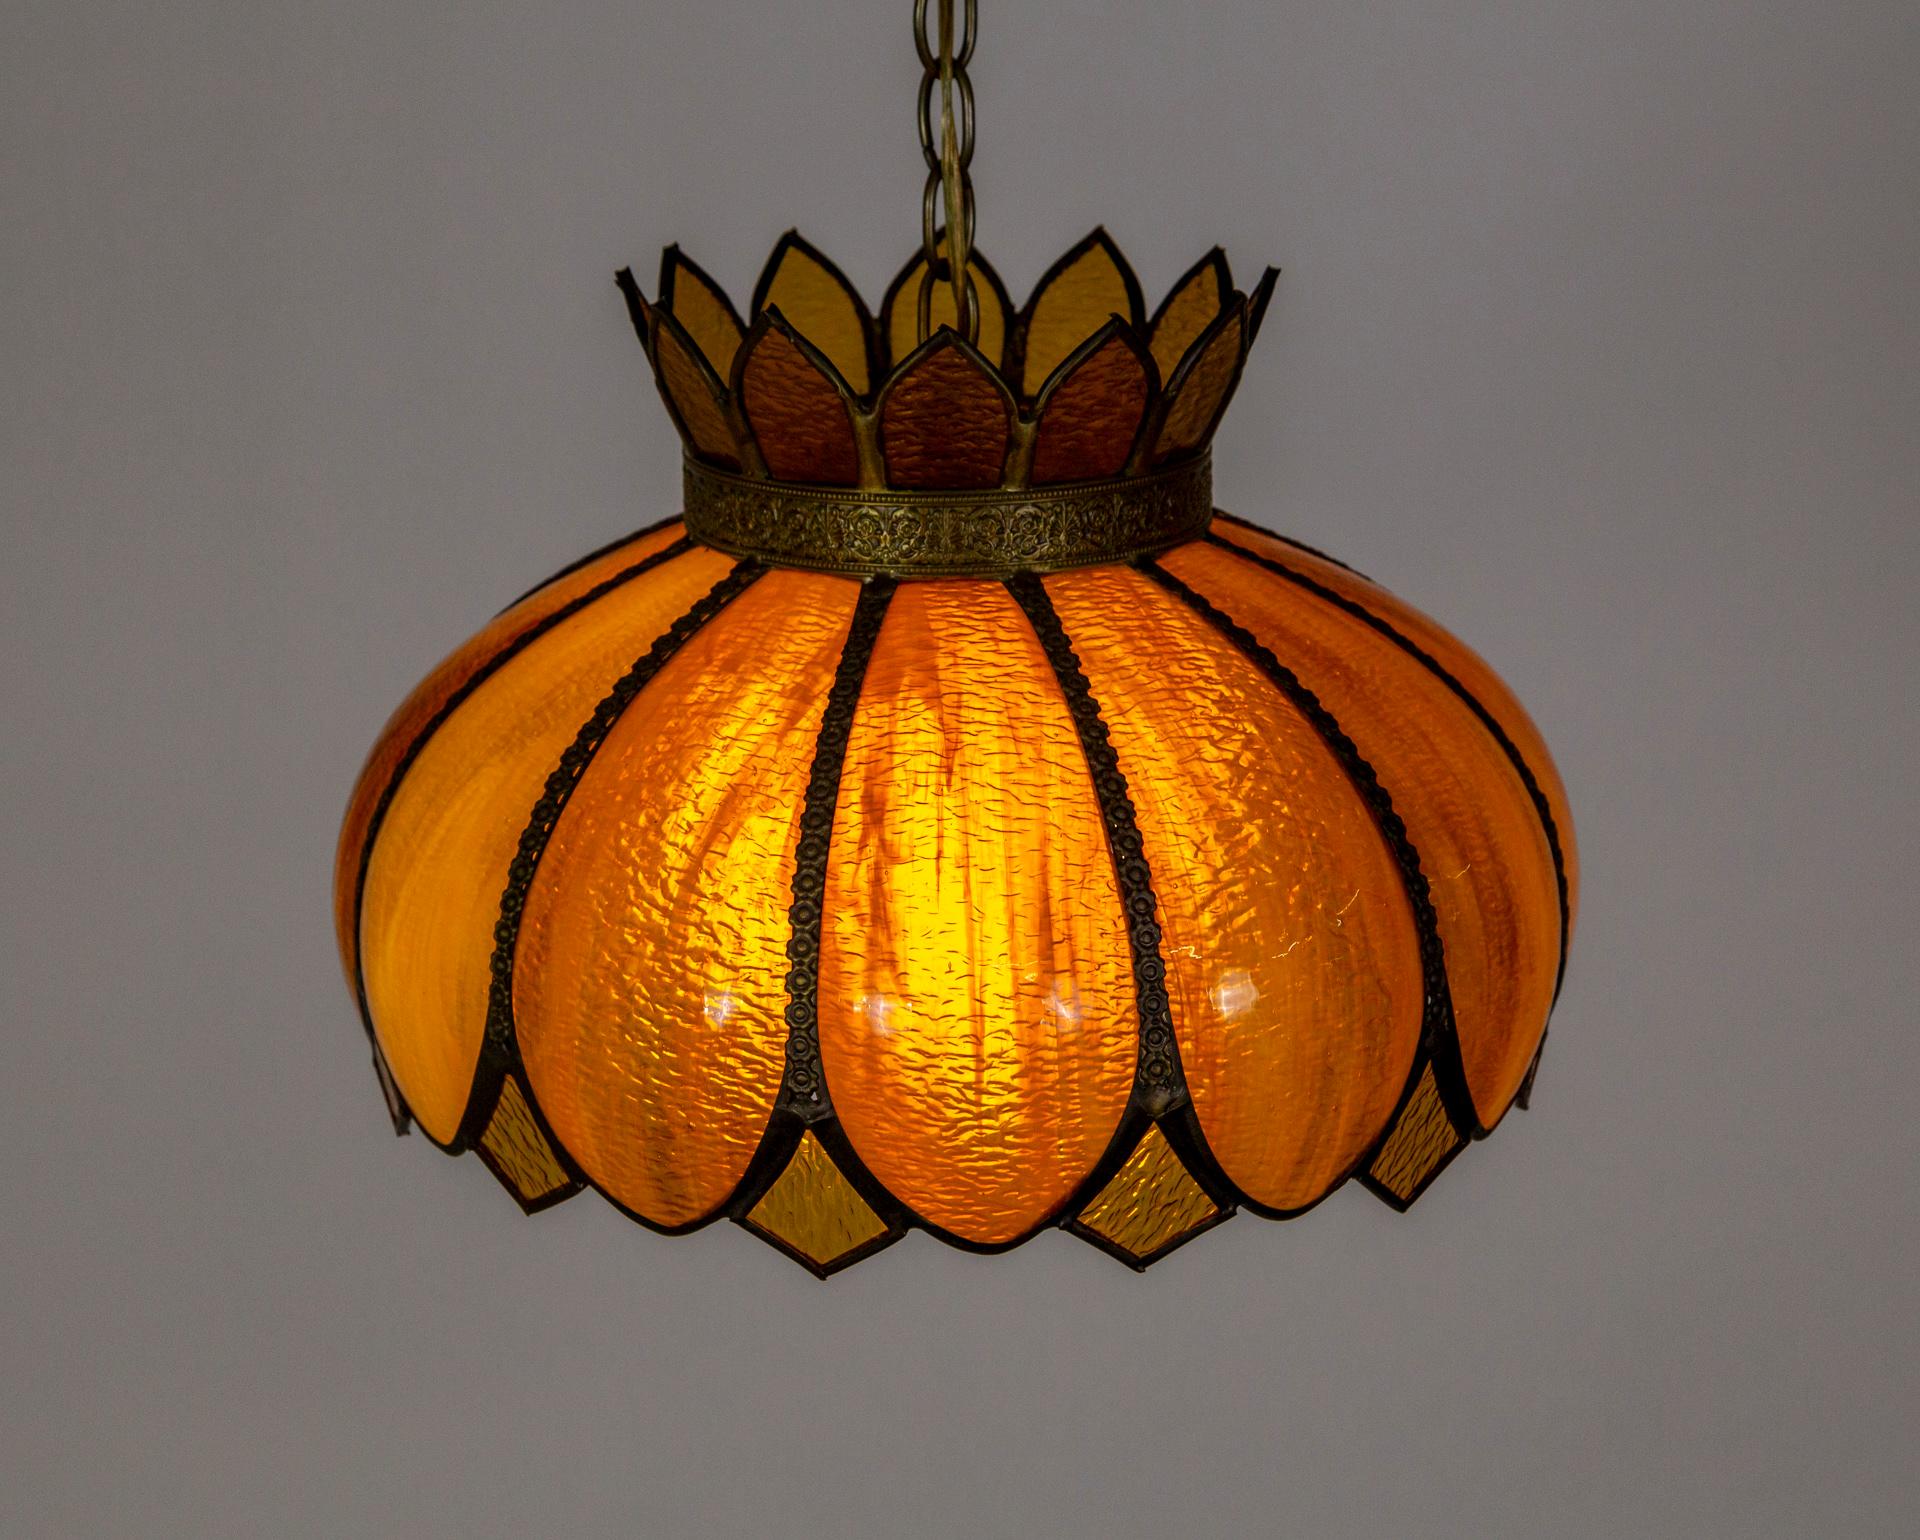 Caramel-Amber Slag Glass Lotus Flower Swag Pendant Light w/ Decorative Trim In Good Condition For Sale In San Francisco, CA